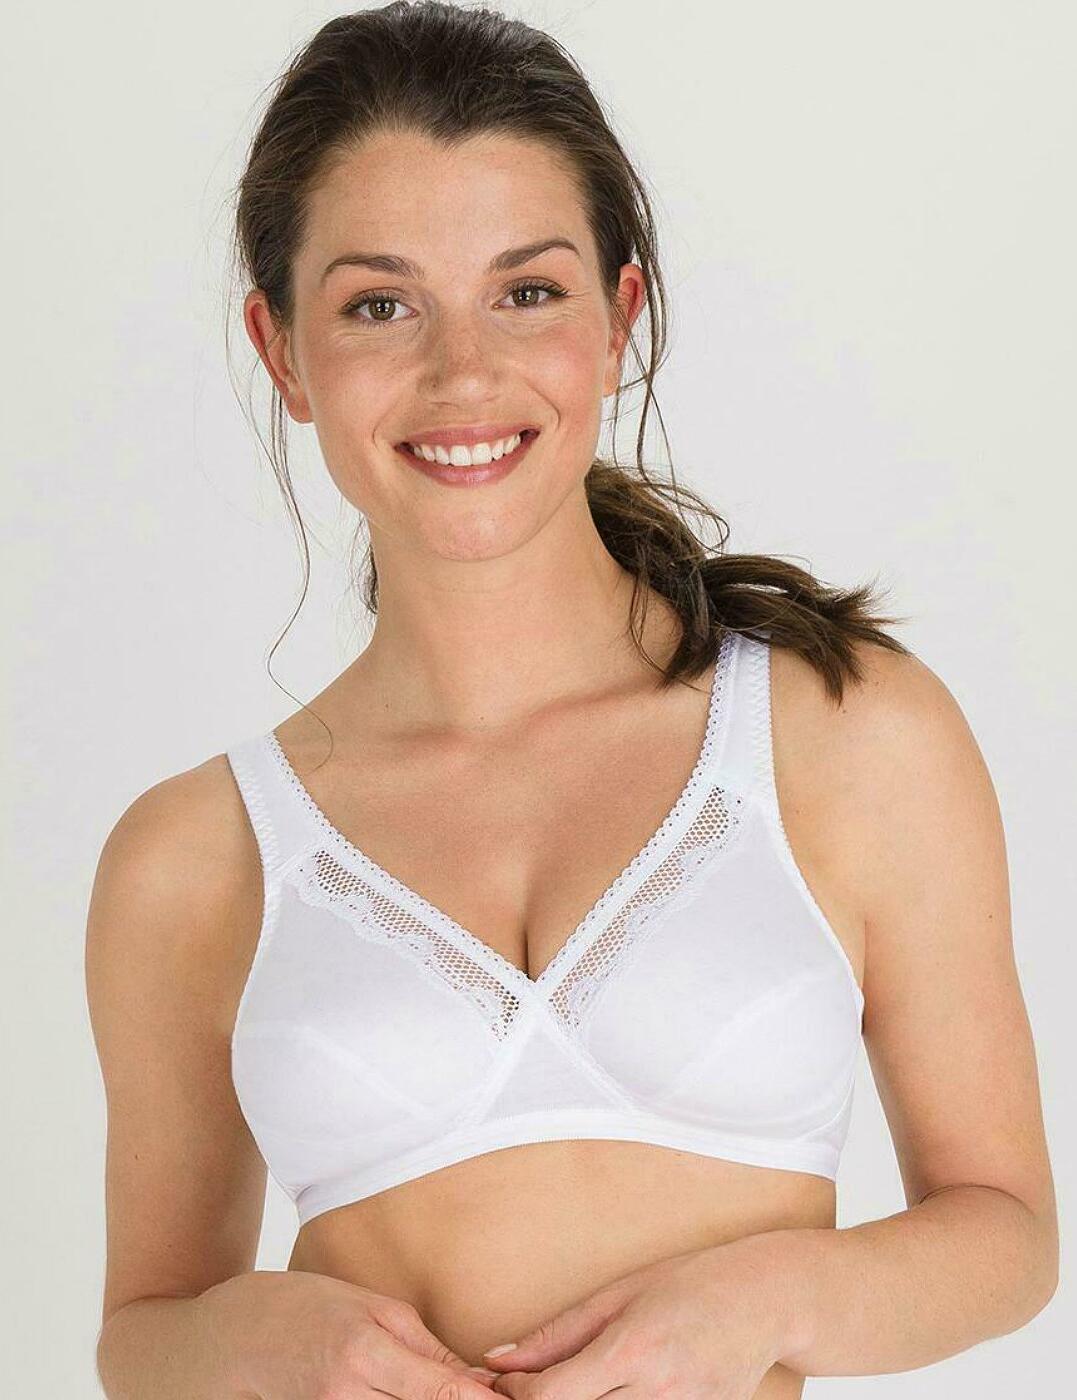 Playtex Classic Support Soft Cotton Bra - Belle Lingerie